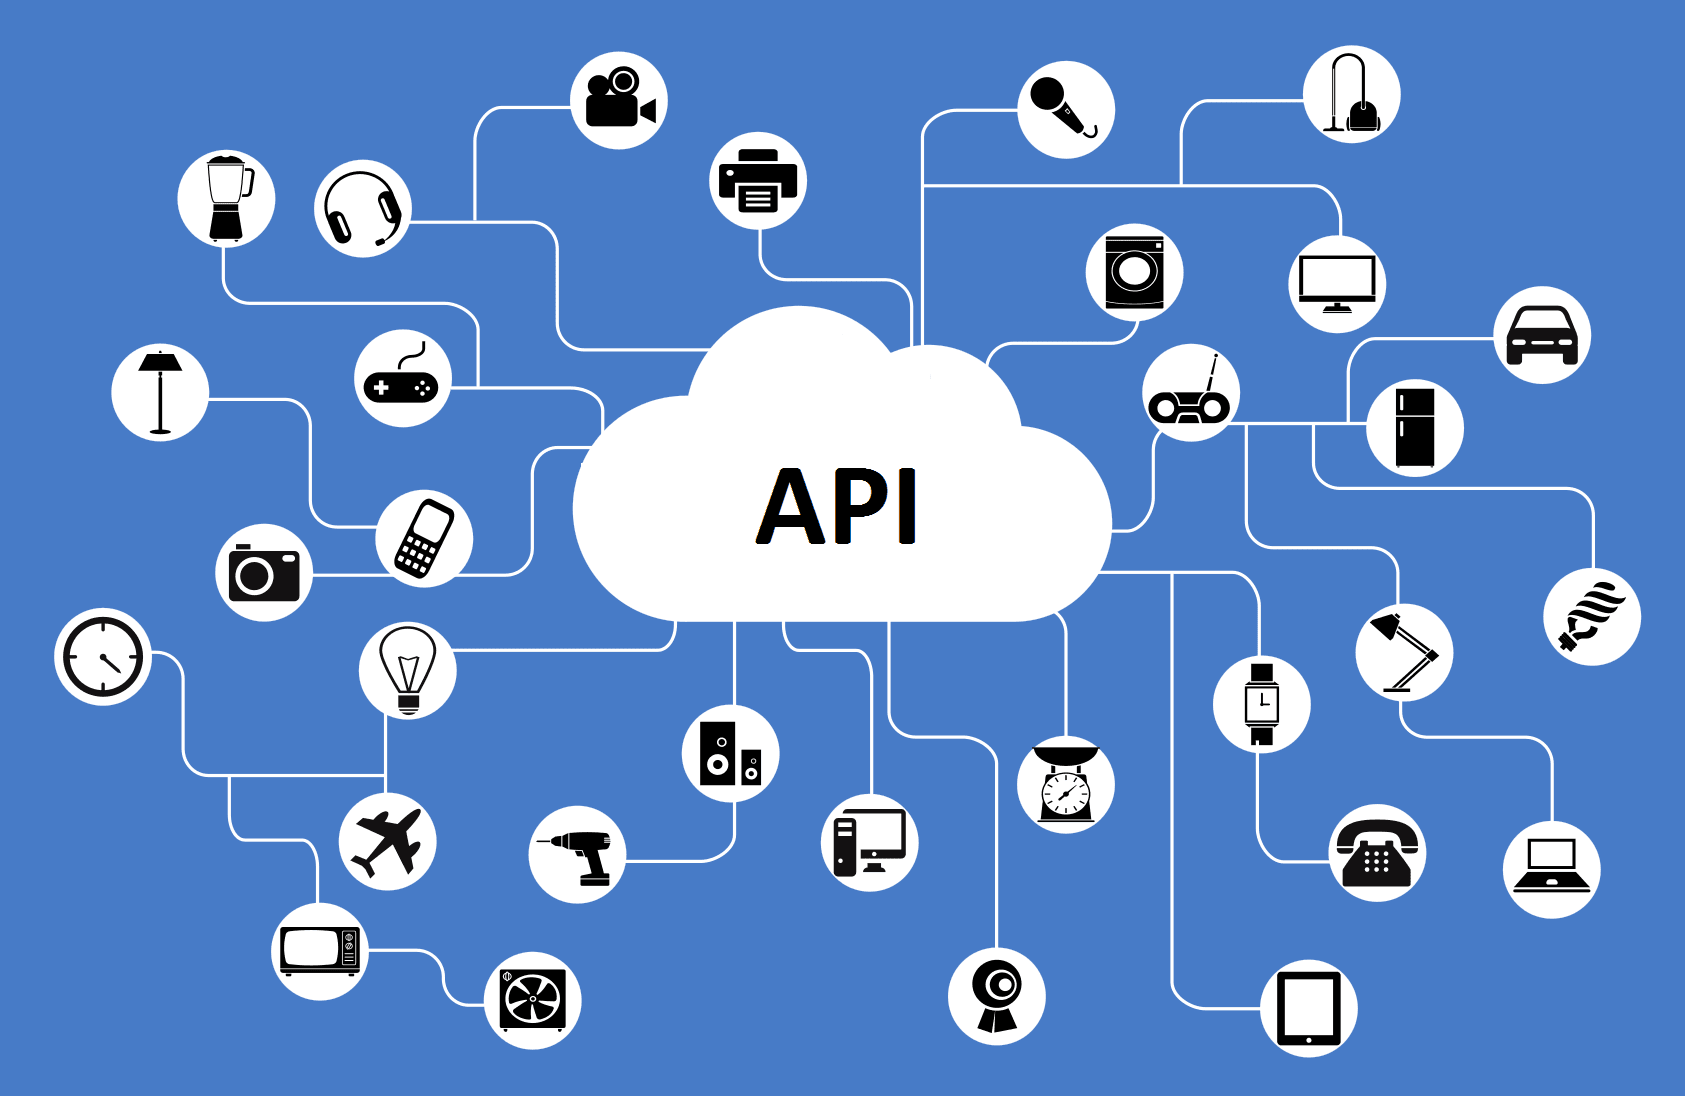 API connected to various devices